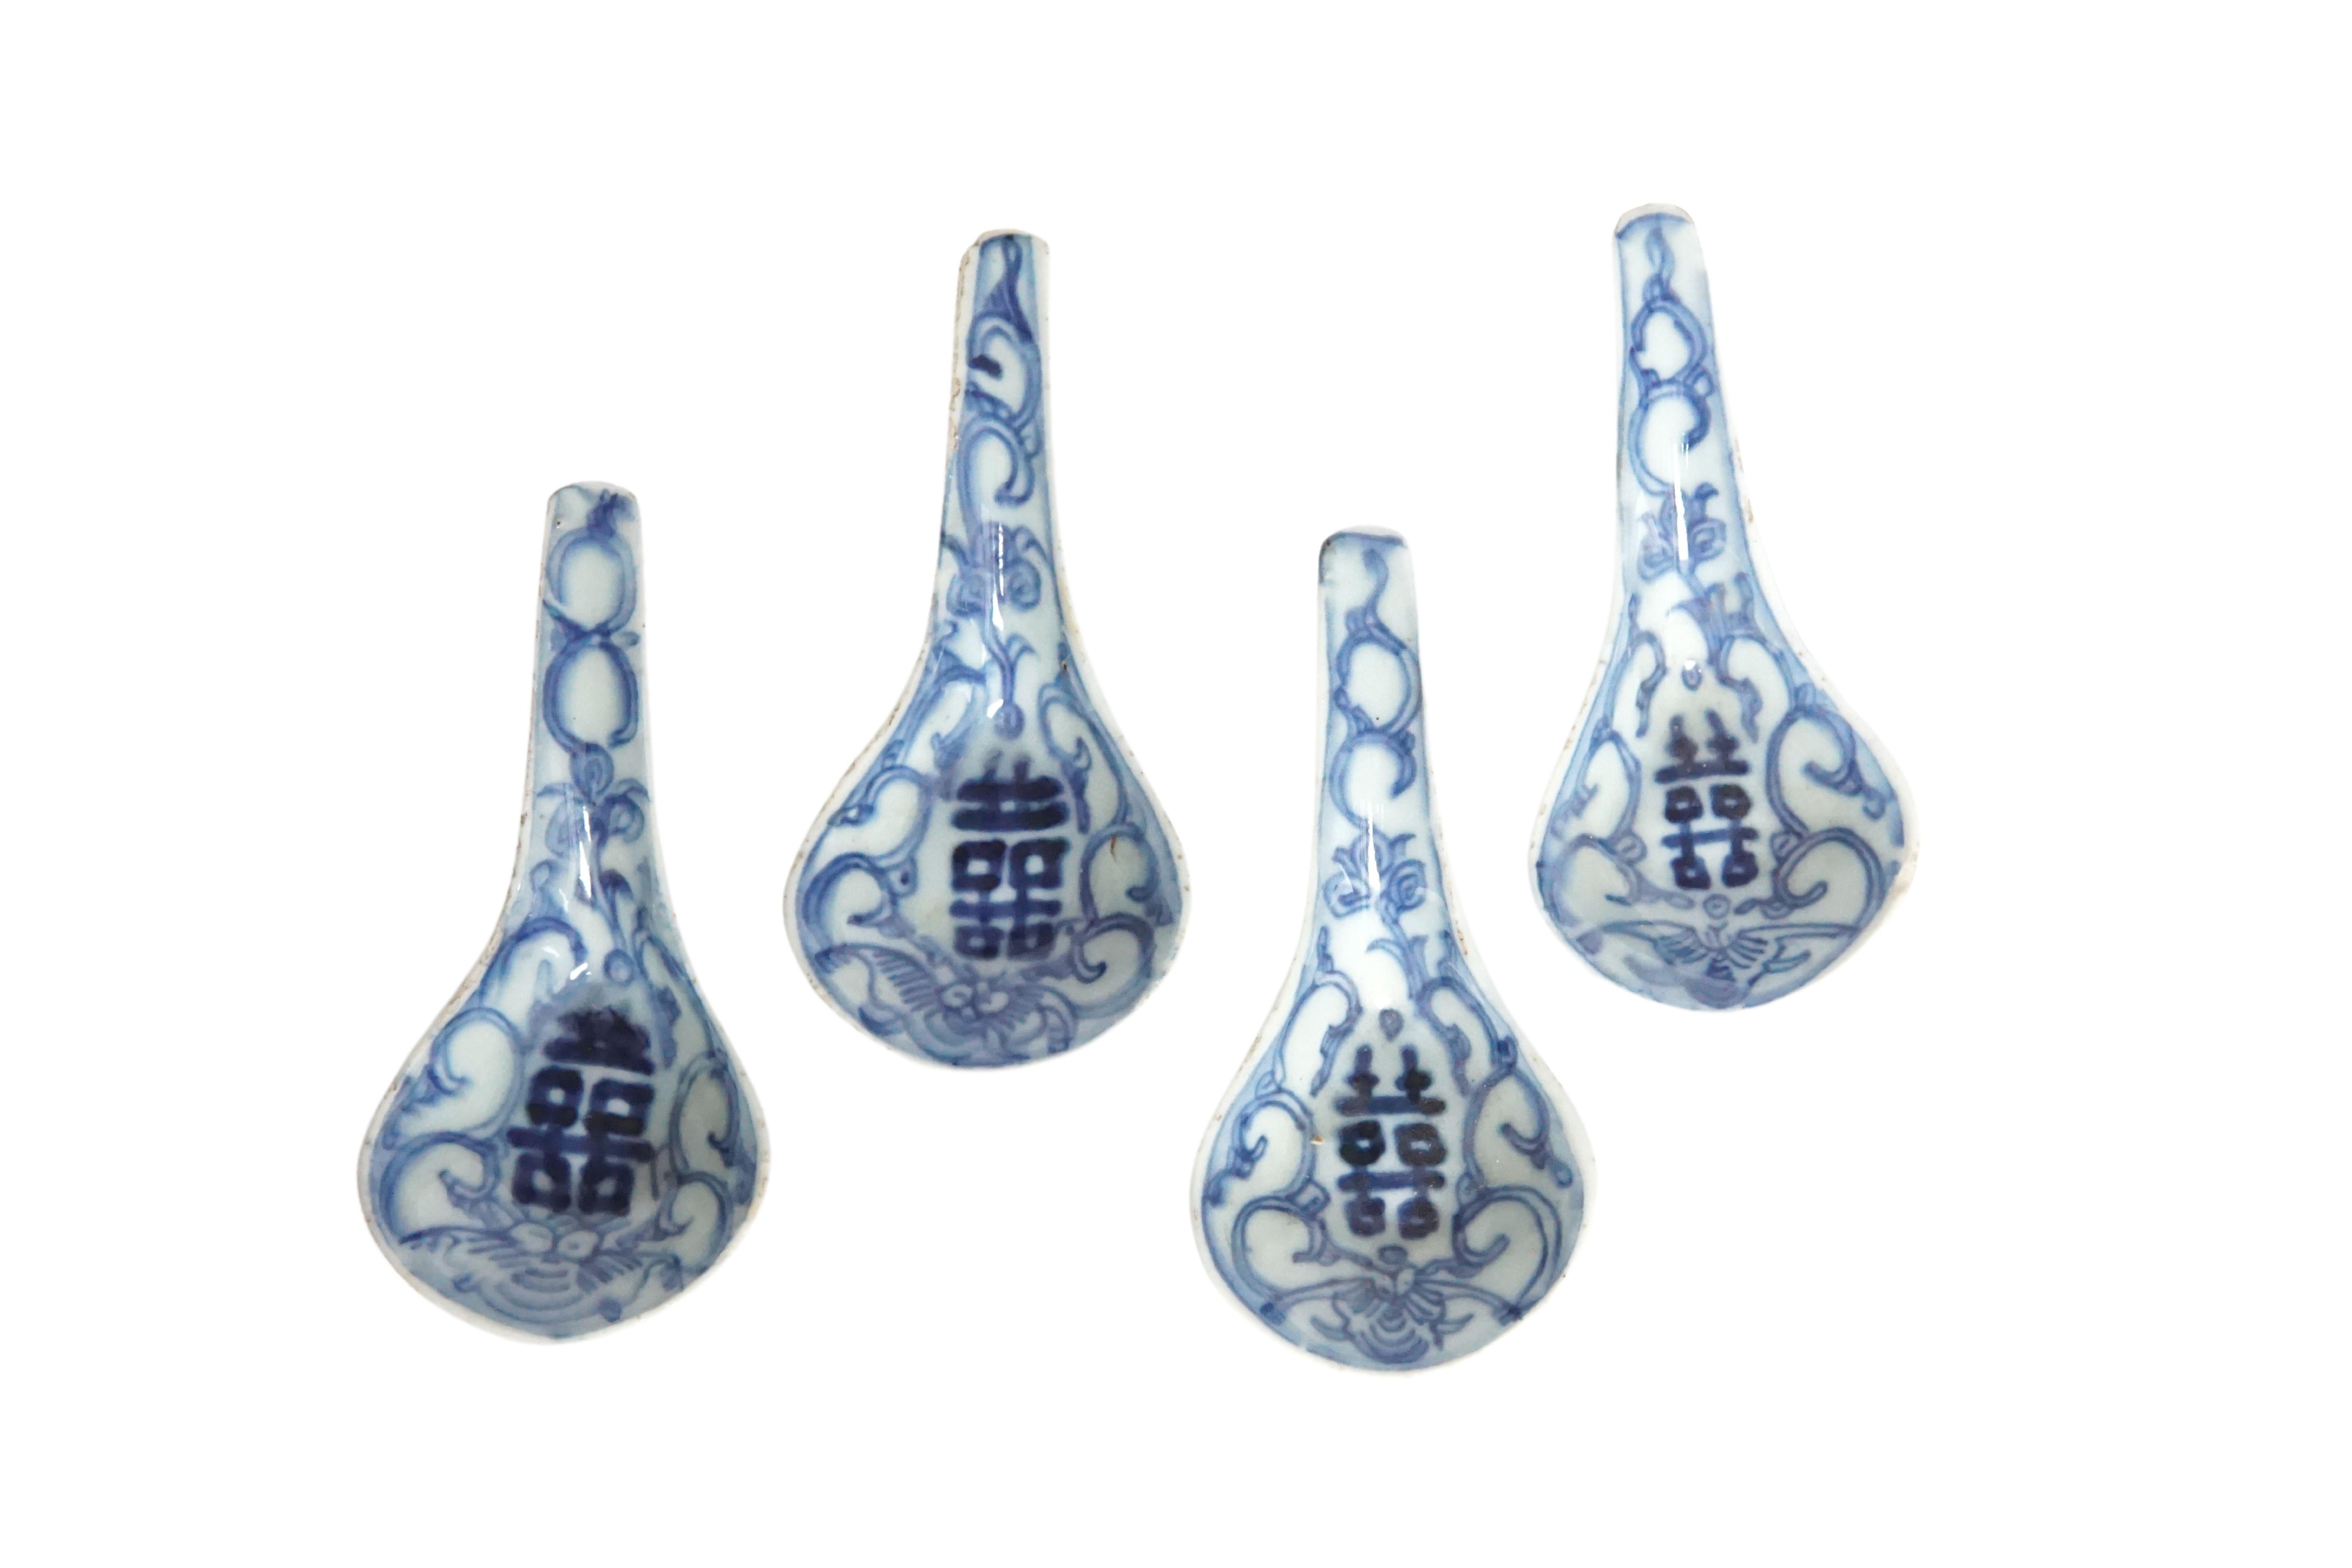 A wonderfully hand-painted set of 4 Chinese blue & white ceramic spoons circa 1850. They bear double happiness signs and wonderful, sculptural shape. A great piece of Chinese History. 
 